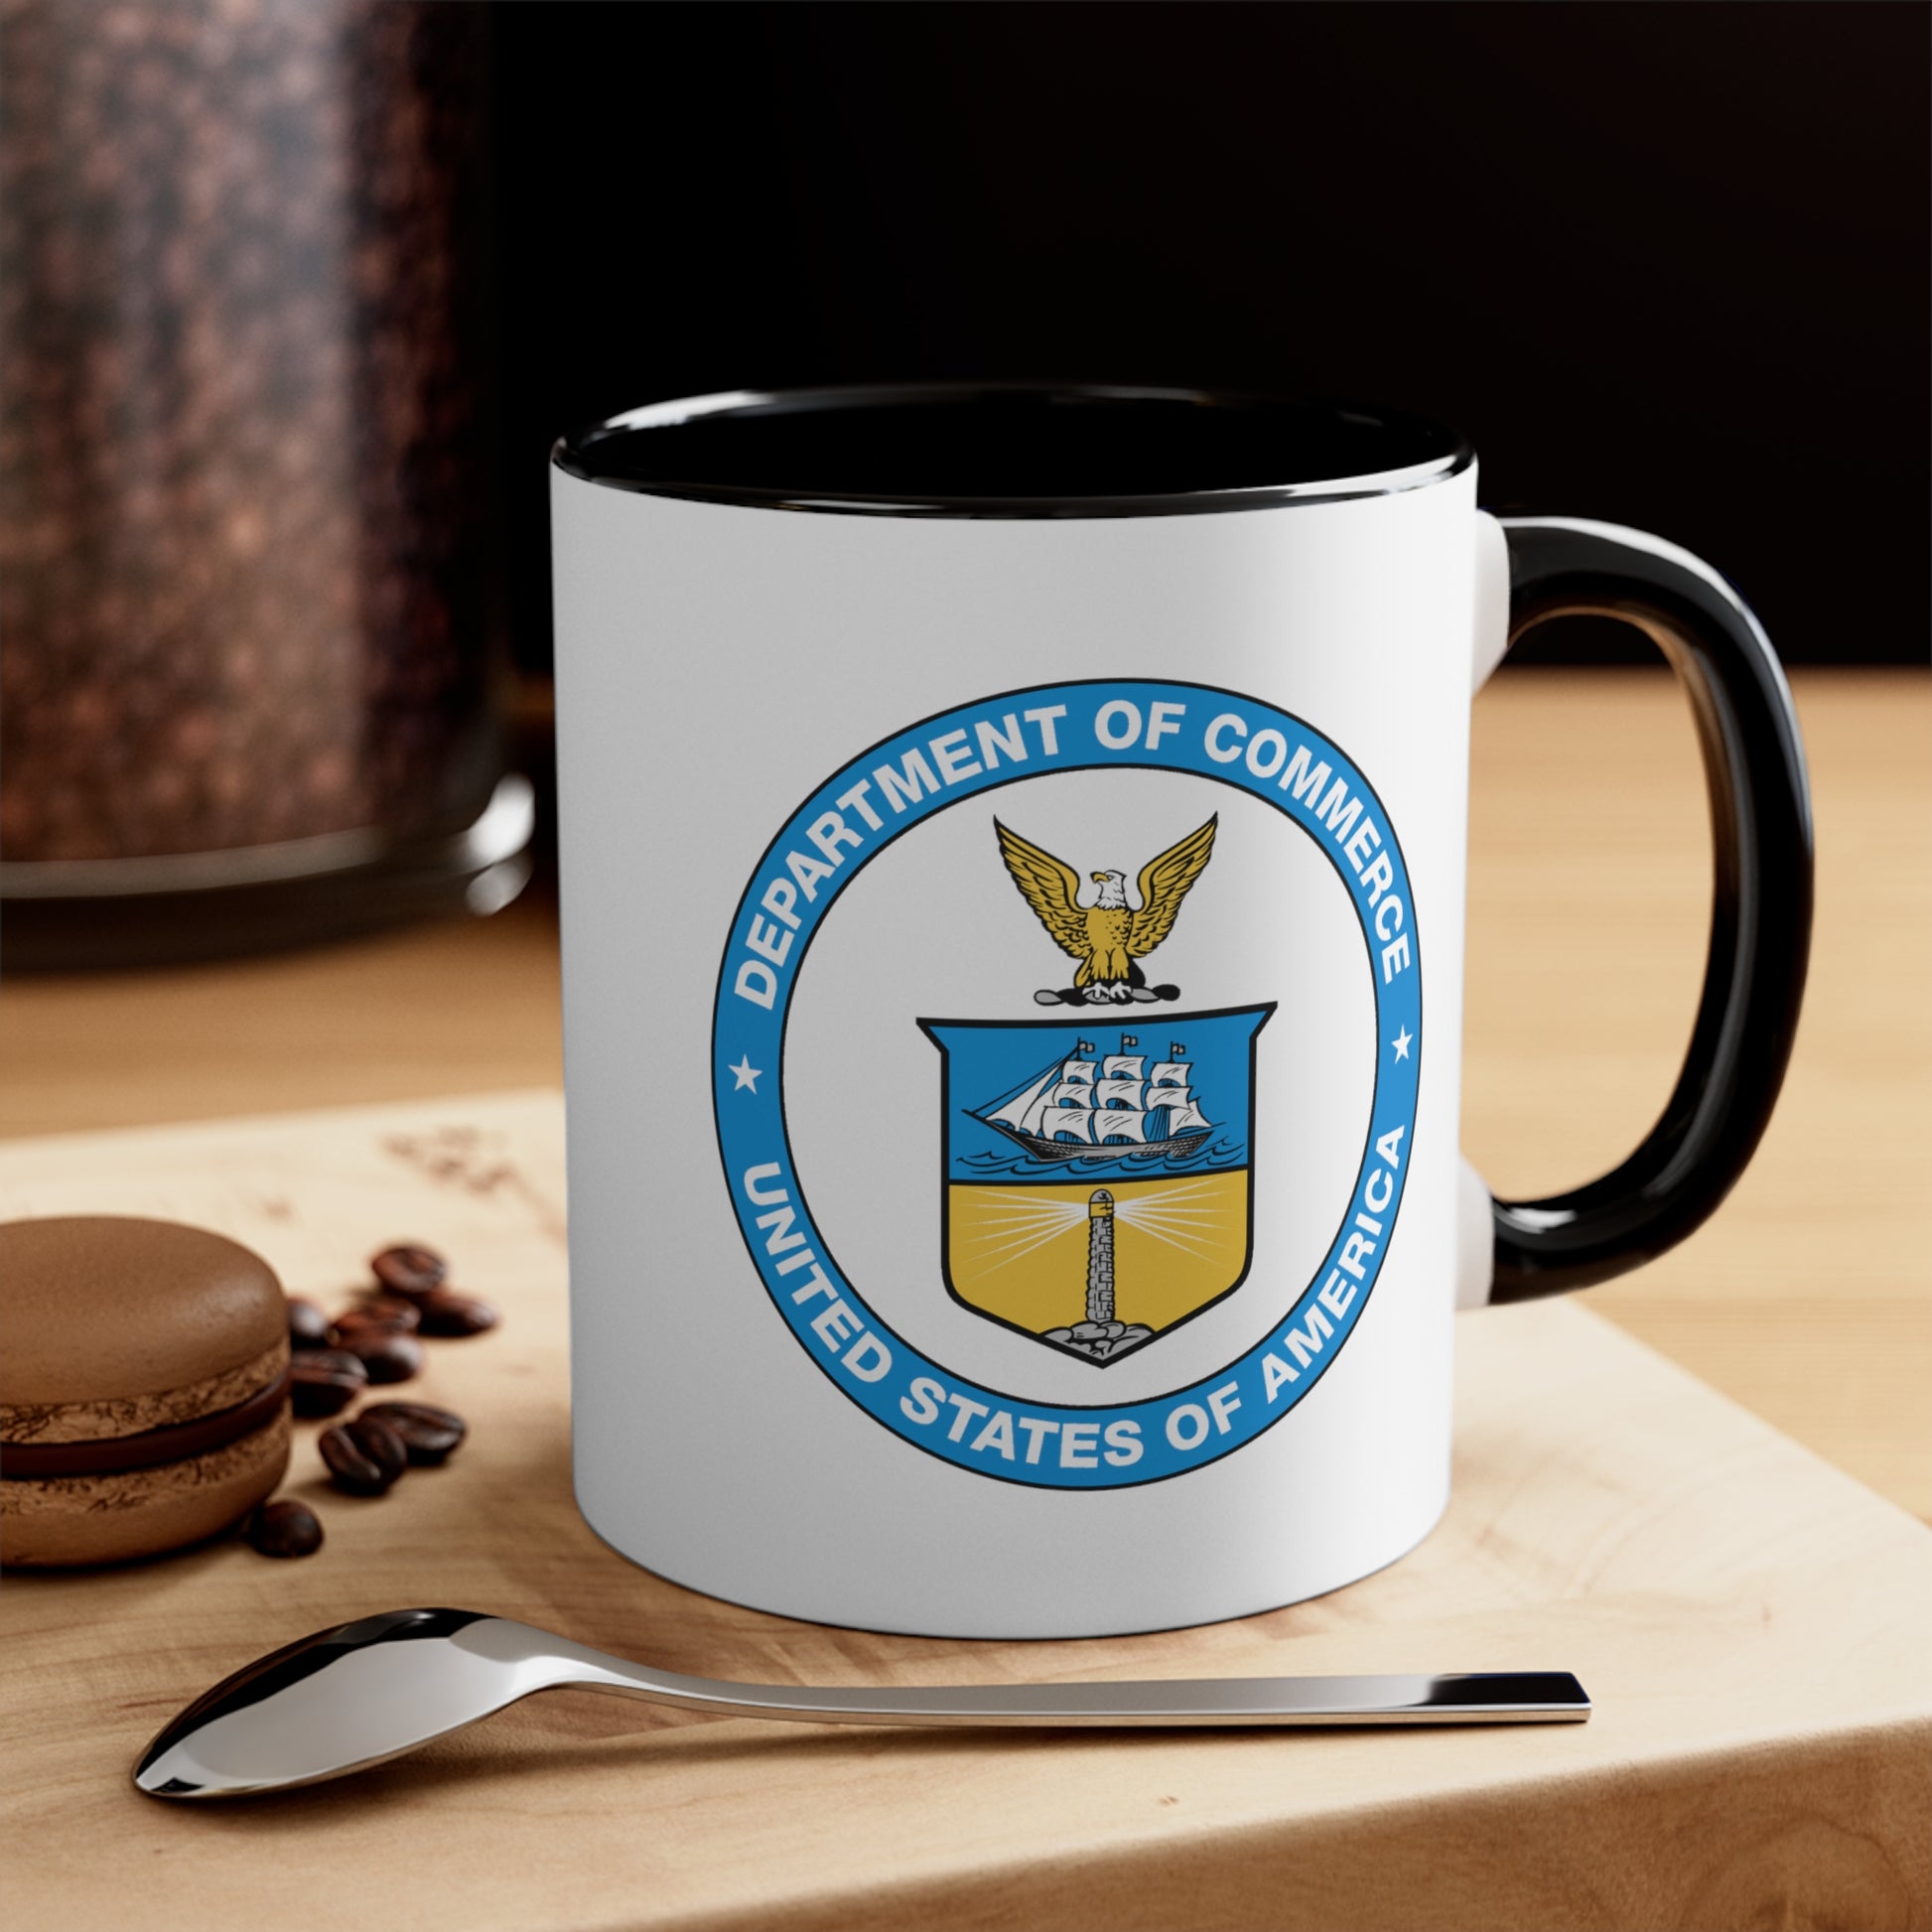 Department of Commerce Coffee Mug - Double Sided Black Accent White Ceramic 11oz by TheGlassyLass.com